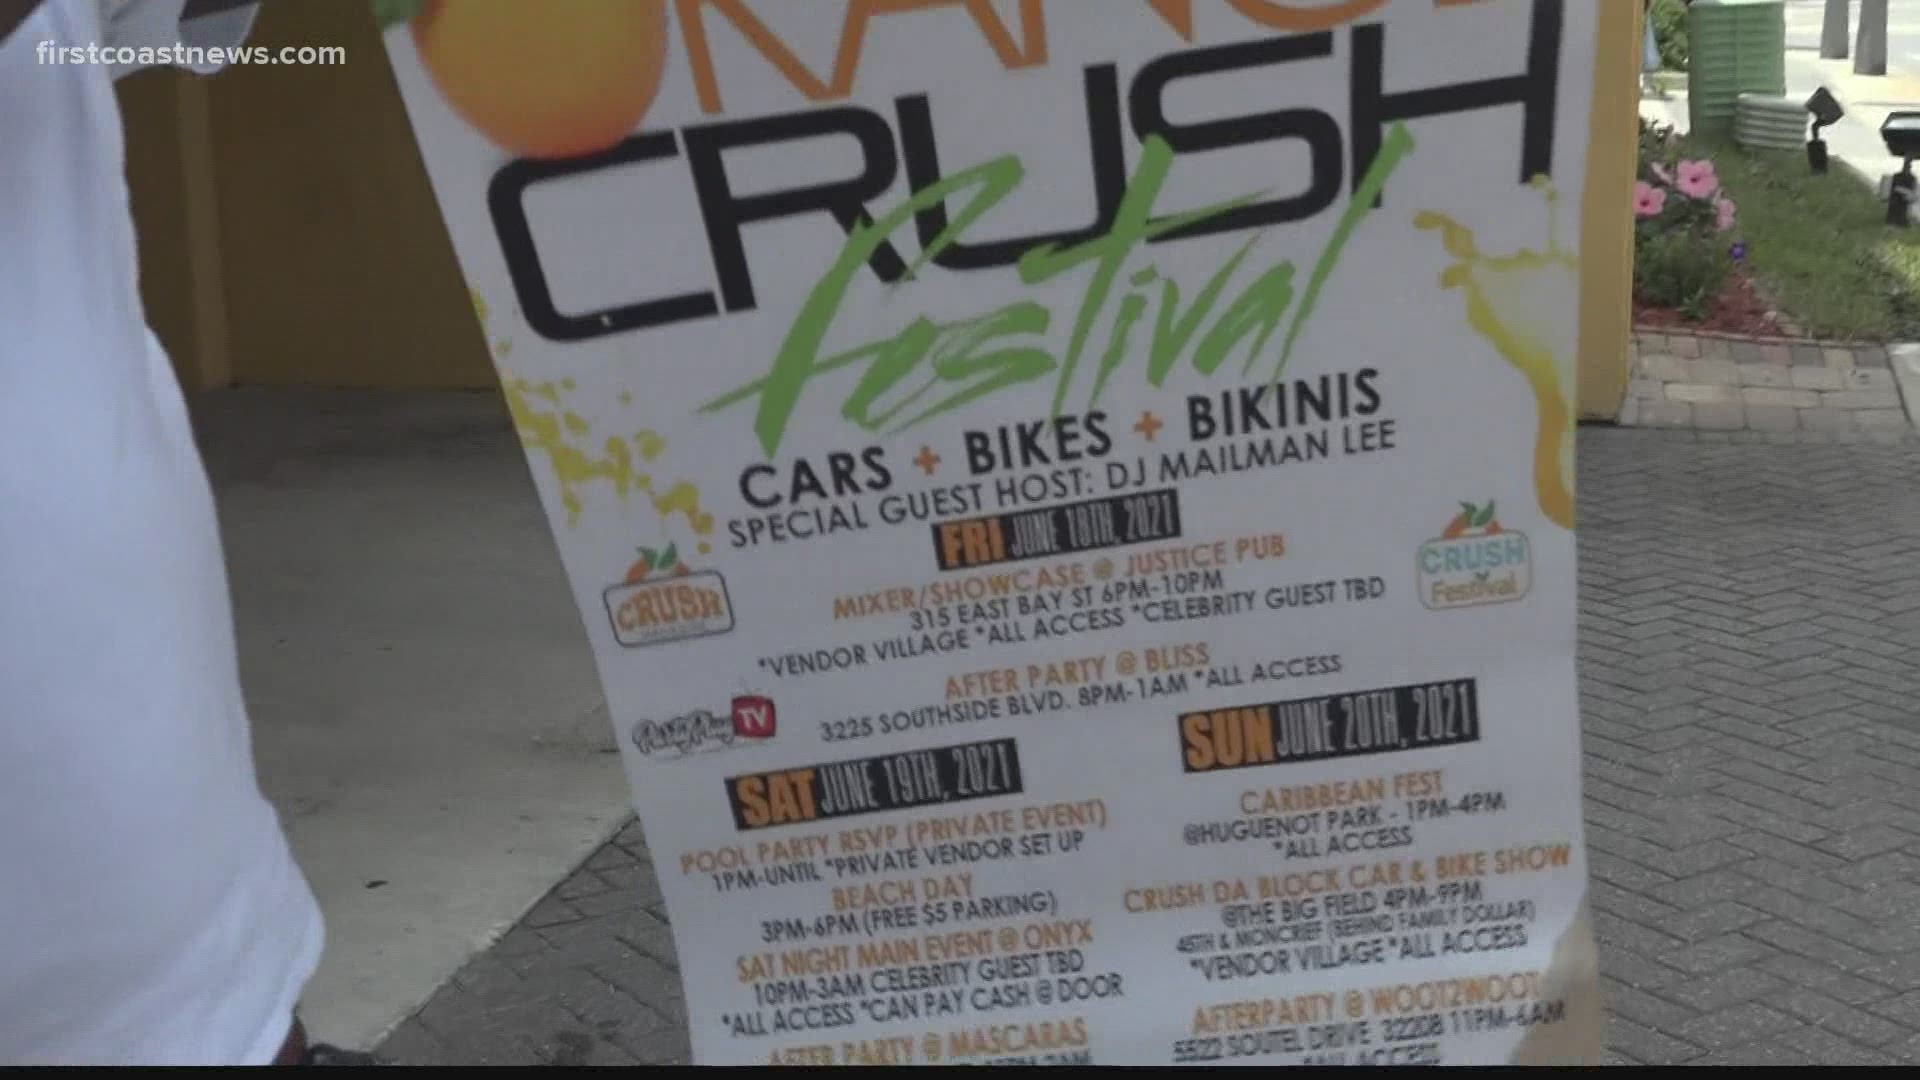 What to expect for Orange Crush Festival this weekend in Florida